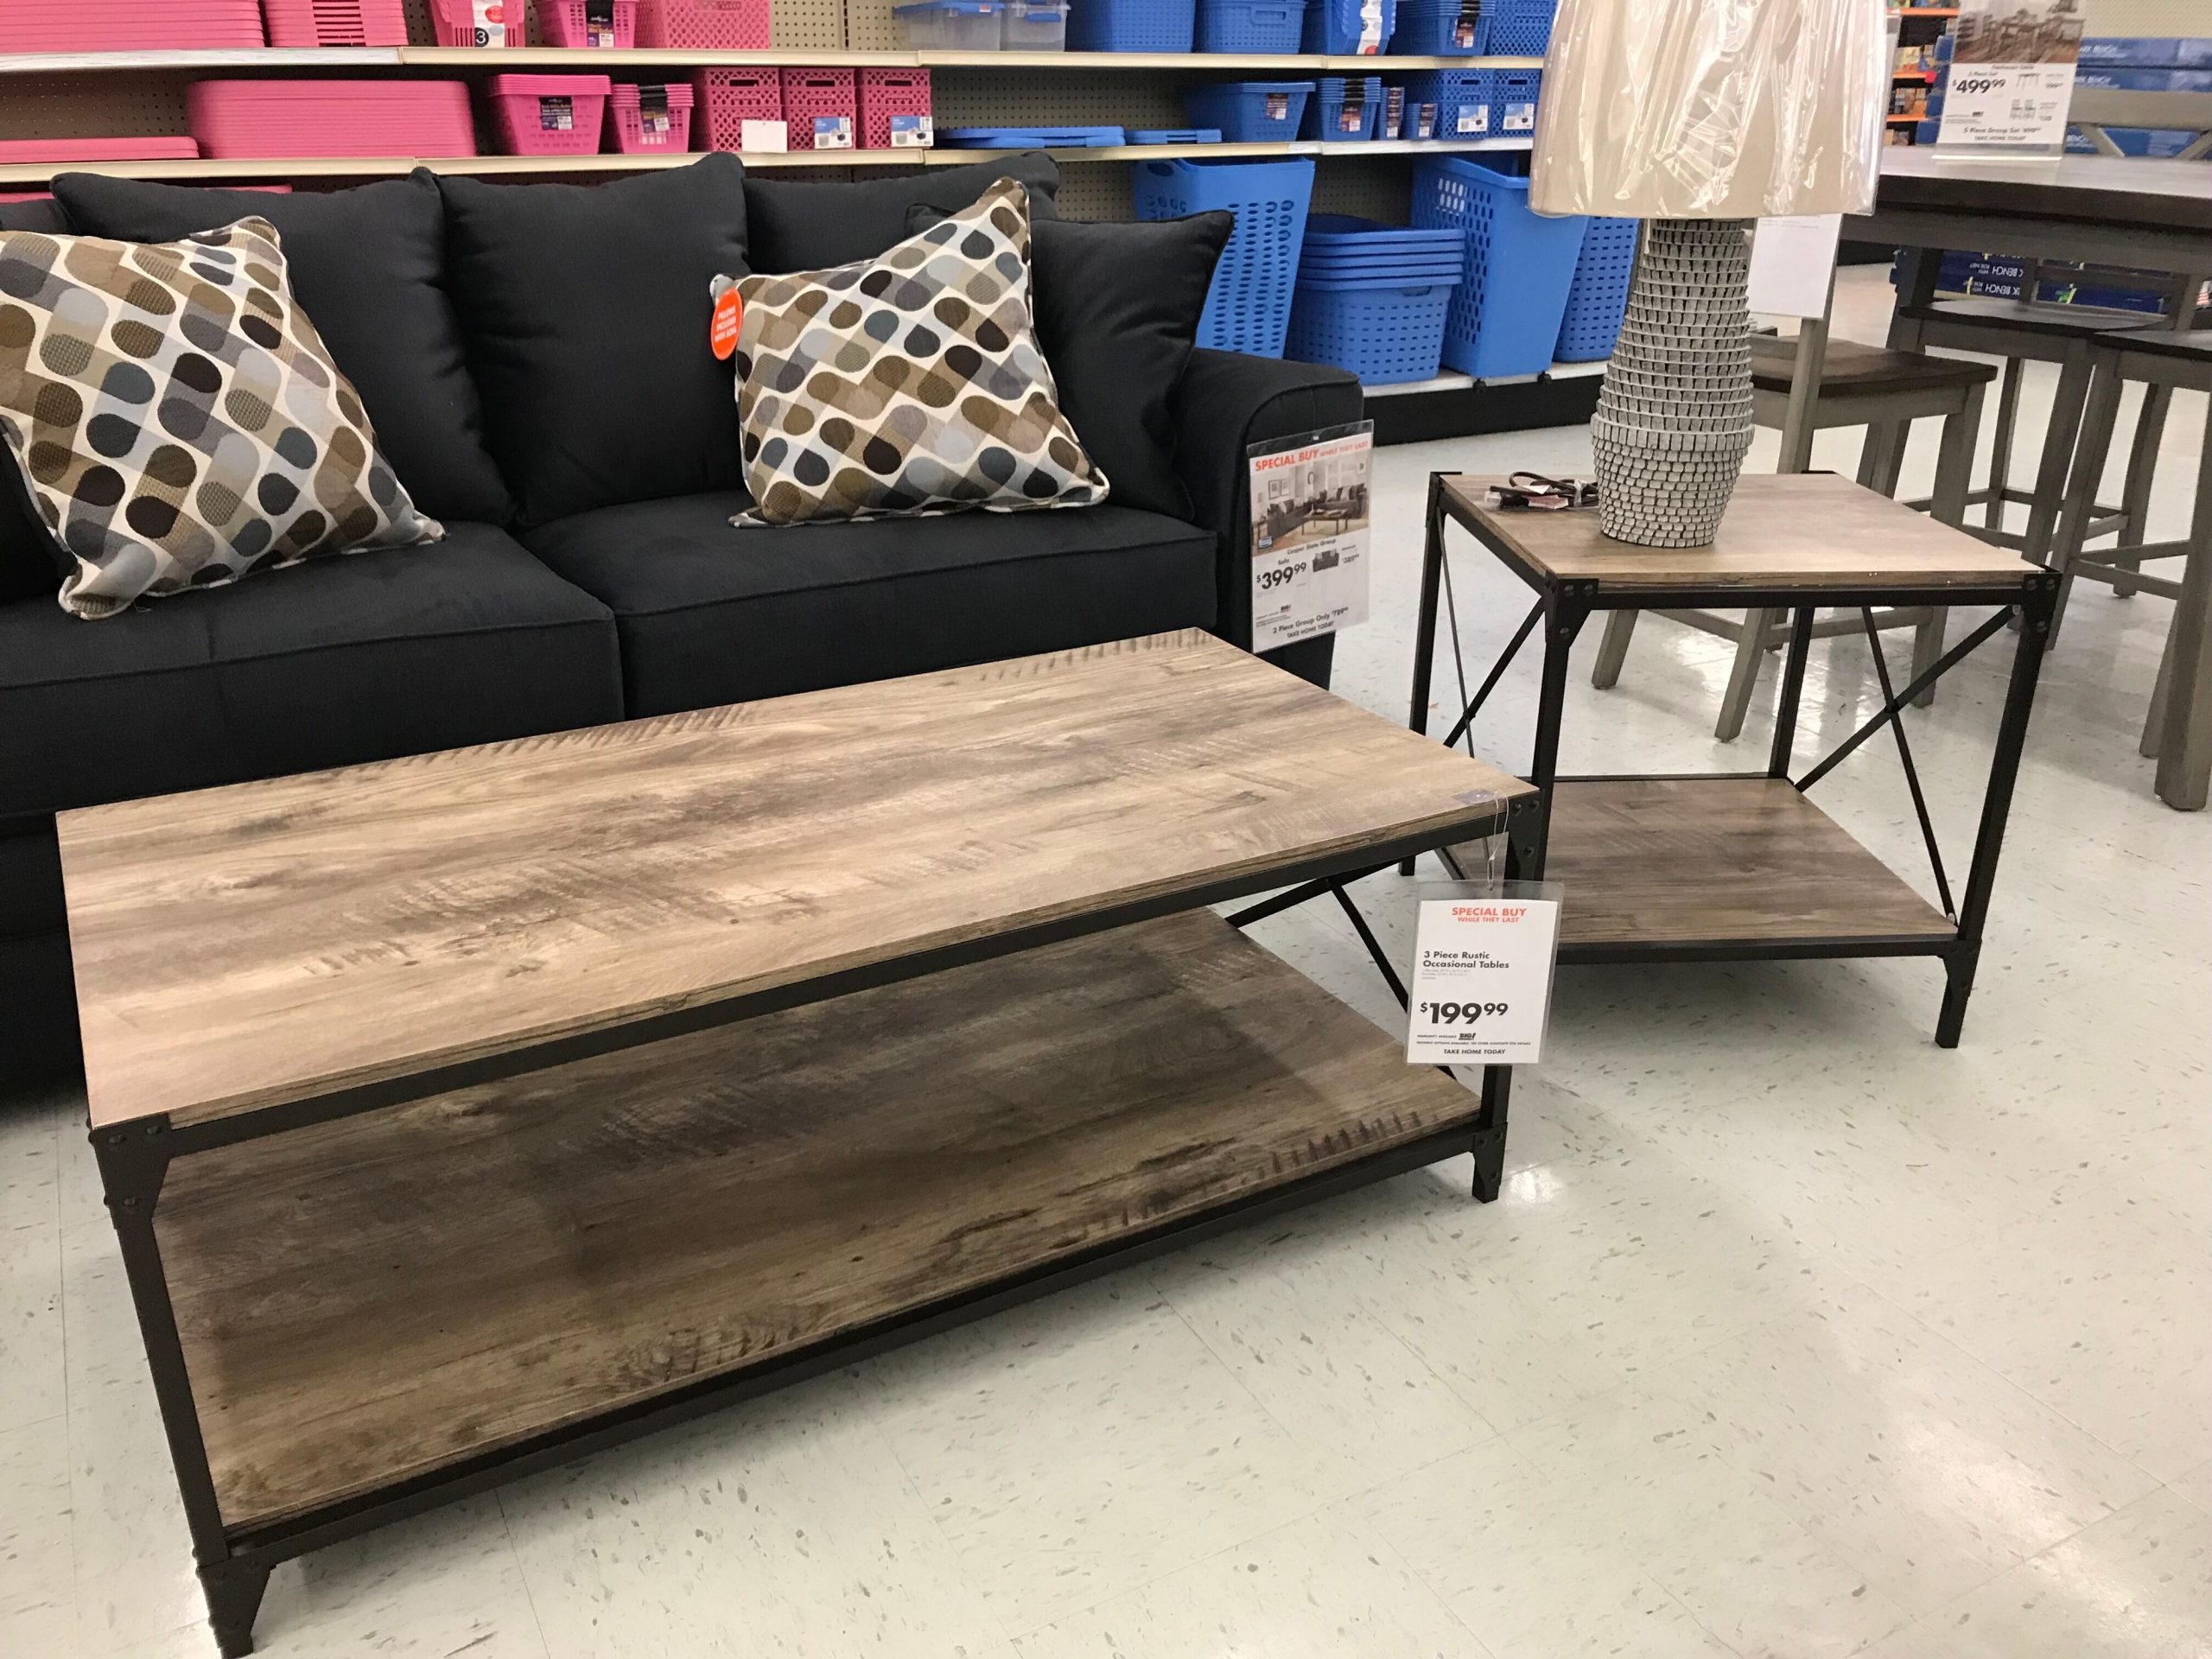 $100 Off $500 at Big Lots: Save on Sectionals & Farmhouse Furniture!